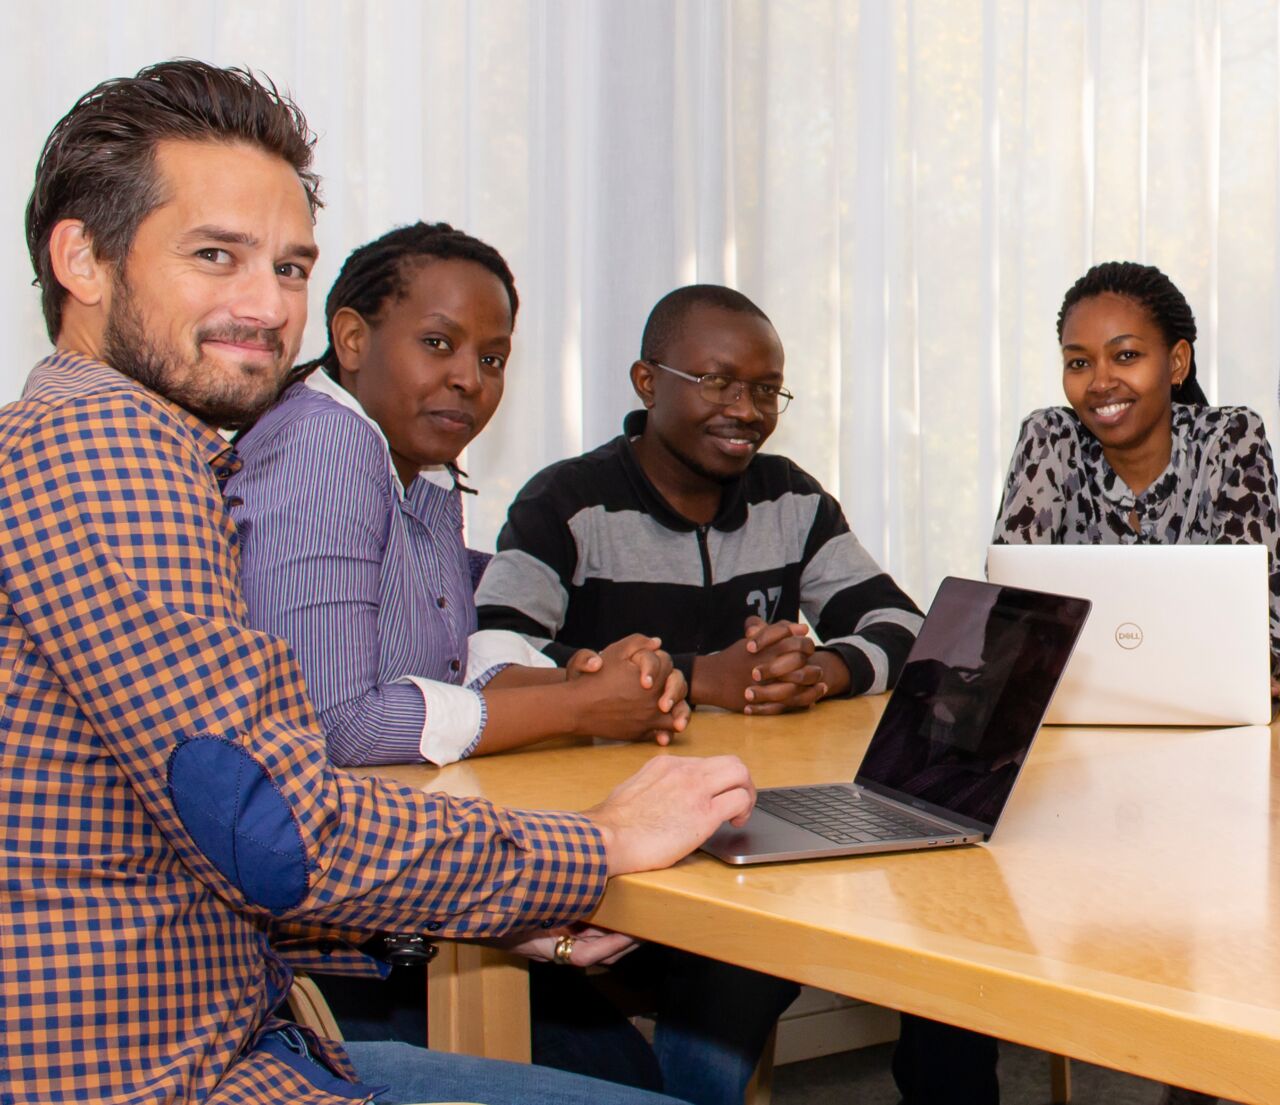  Martin Singull (in the foreground) with doctoral students participating in the research collaboration with Africa.